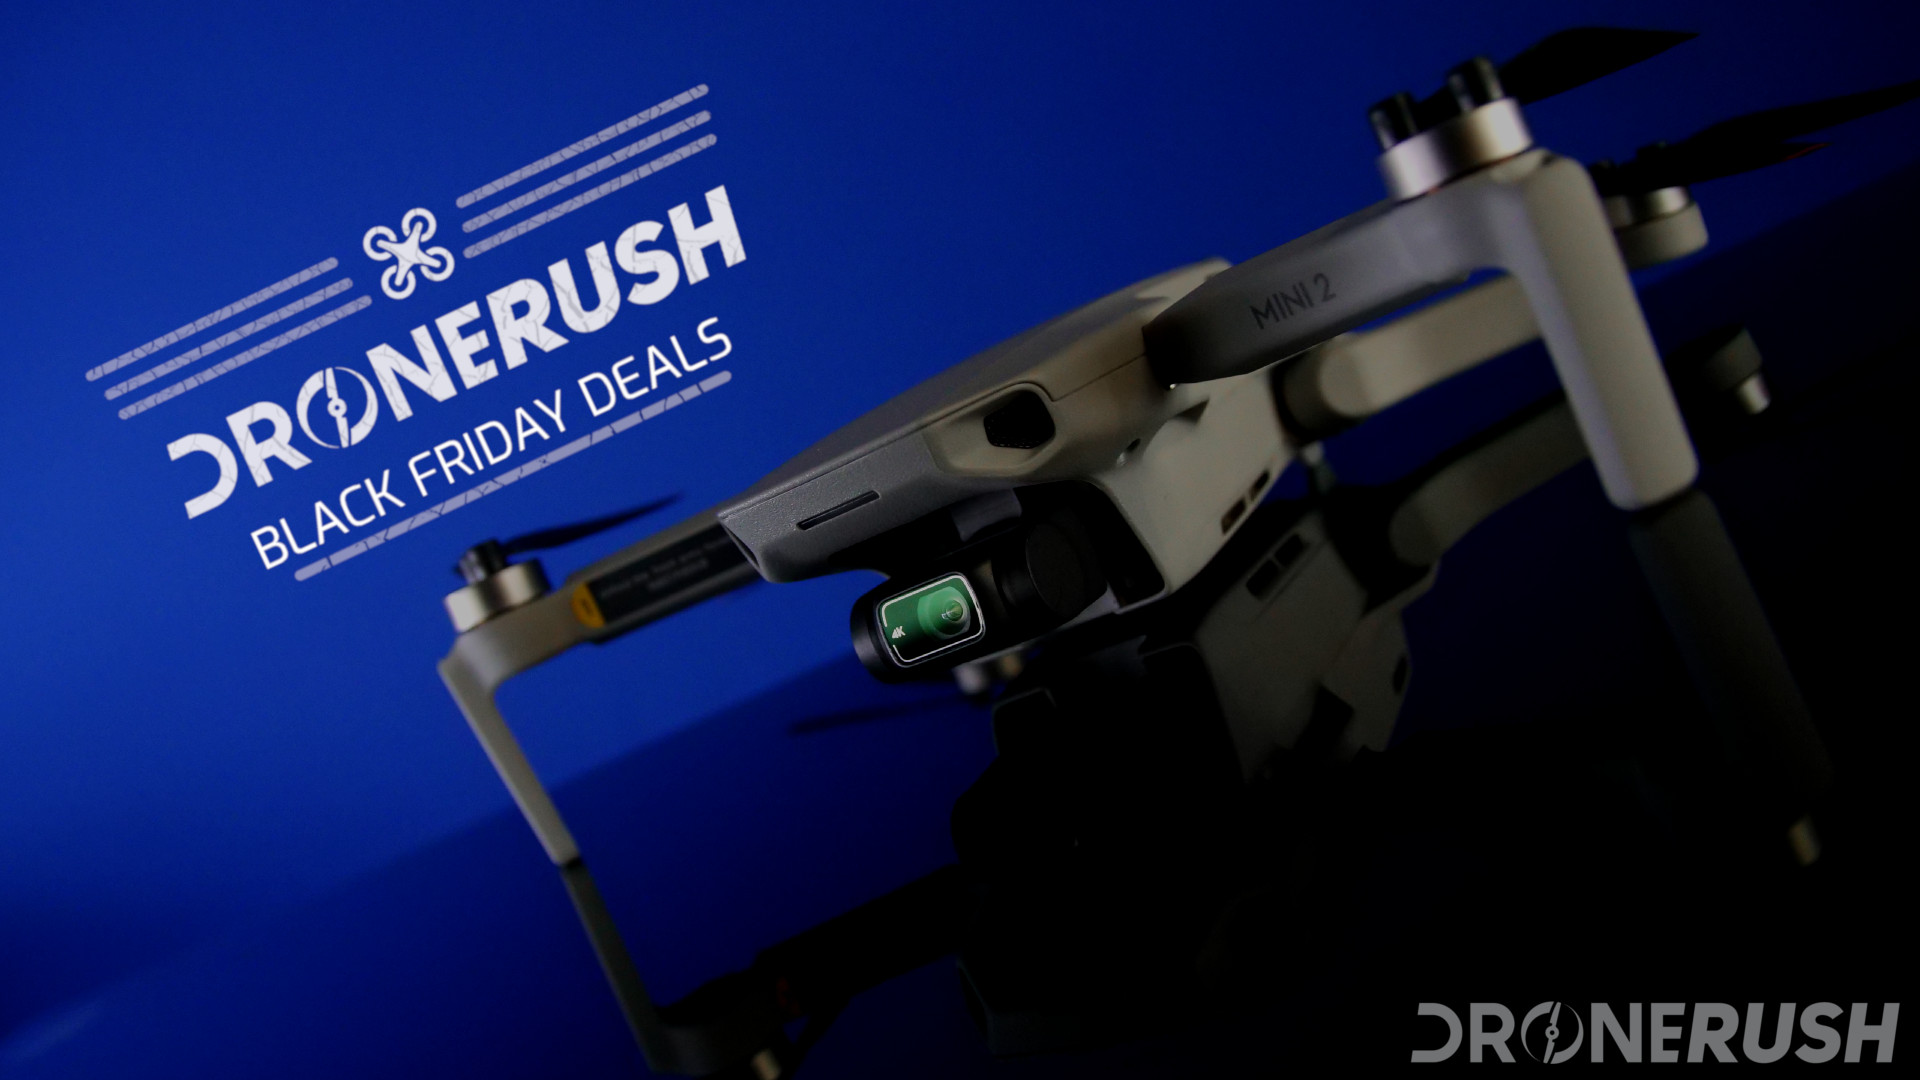 Drone Rush - Drone Rush is your source for news, reviews and more 